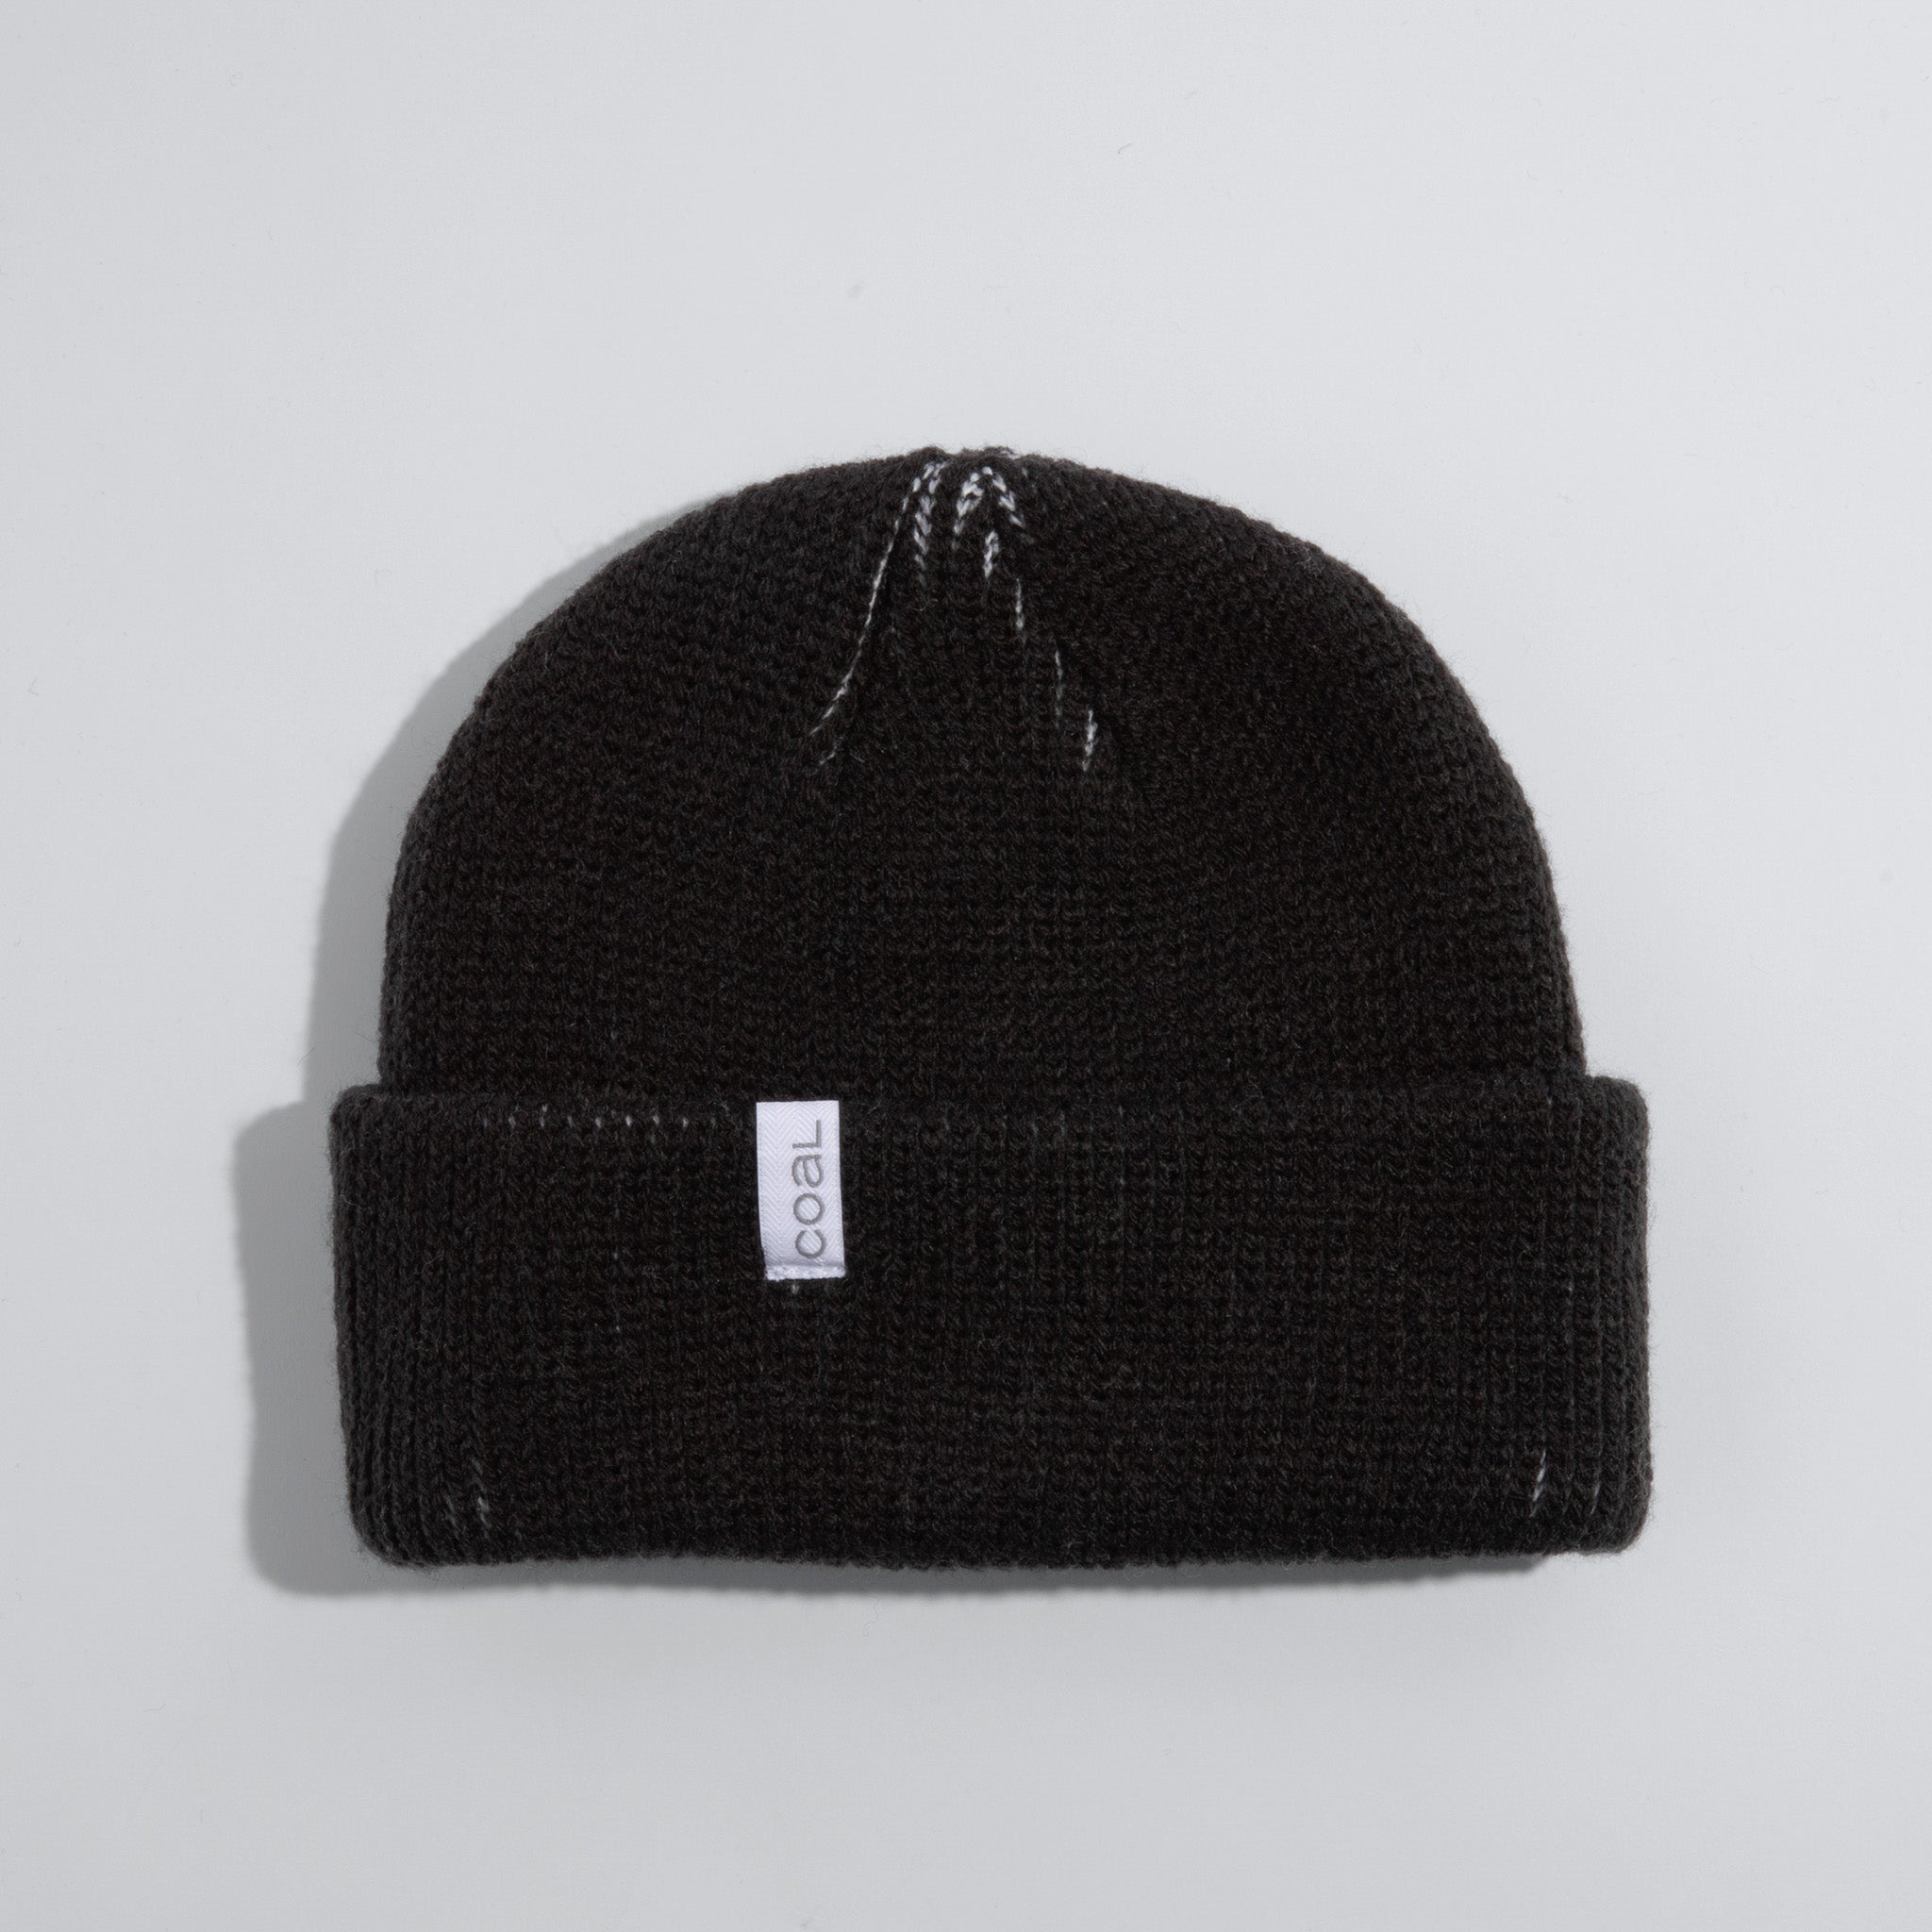 The Frena Thick Knit Cuffed Slouch Beanie